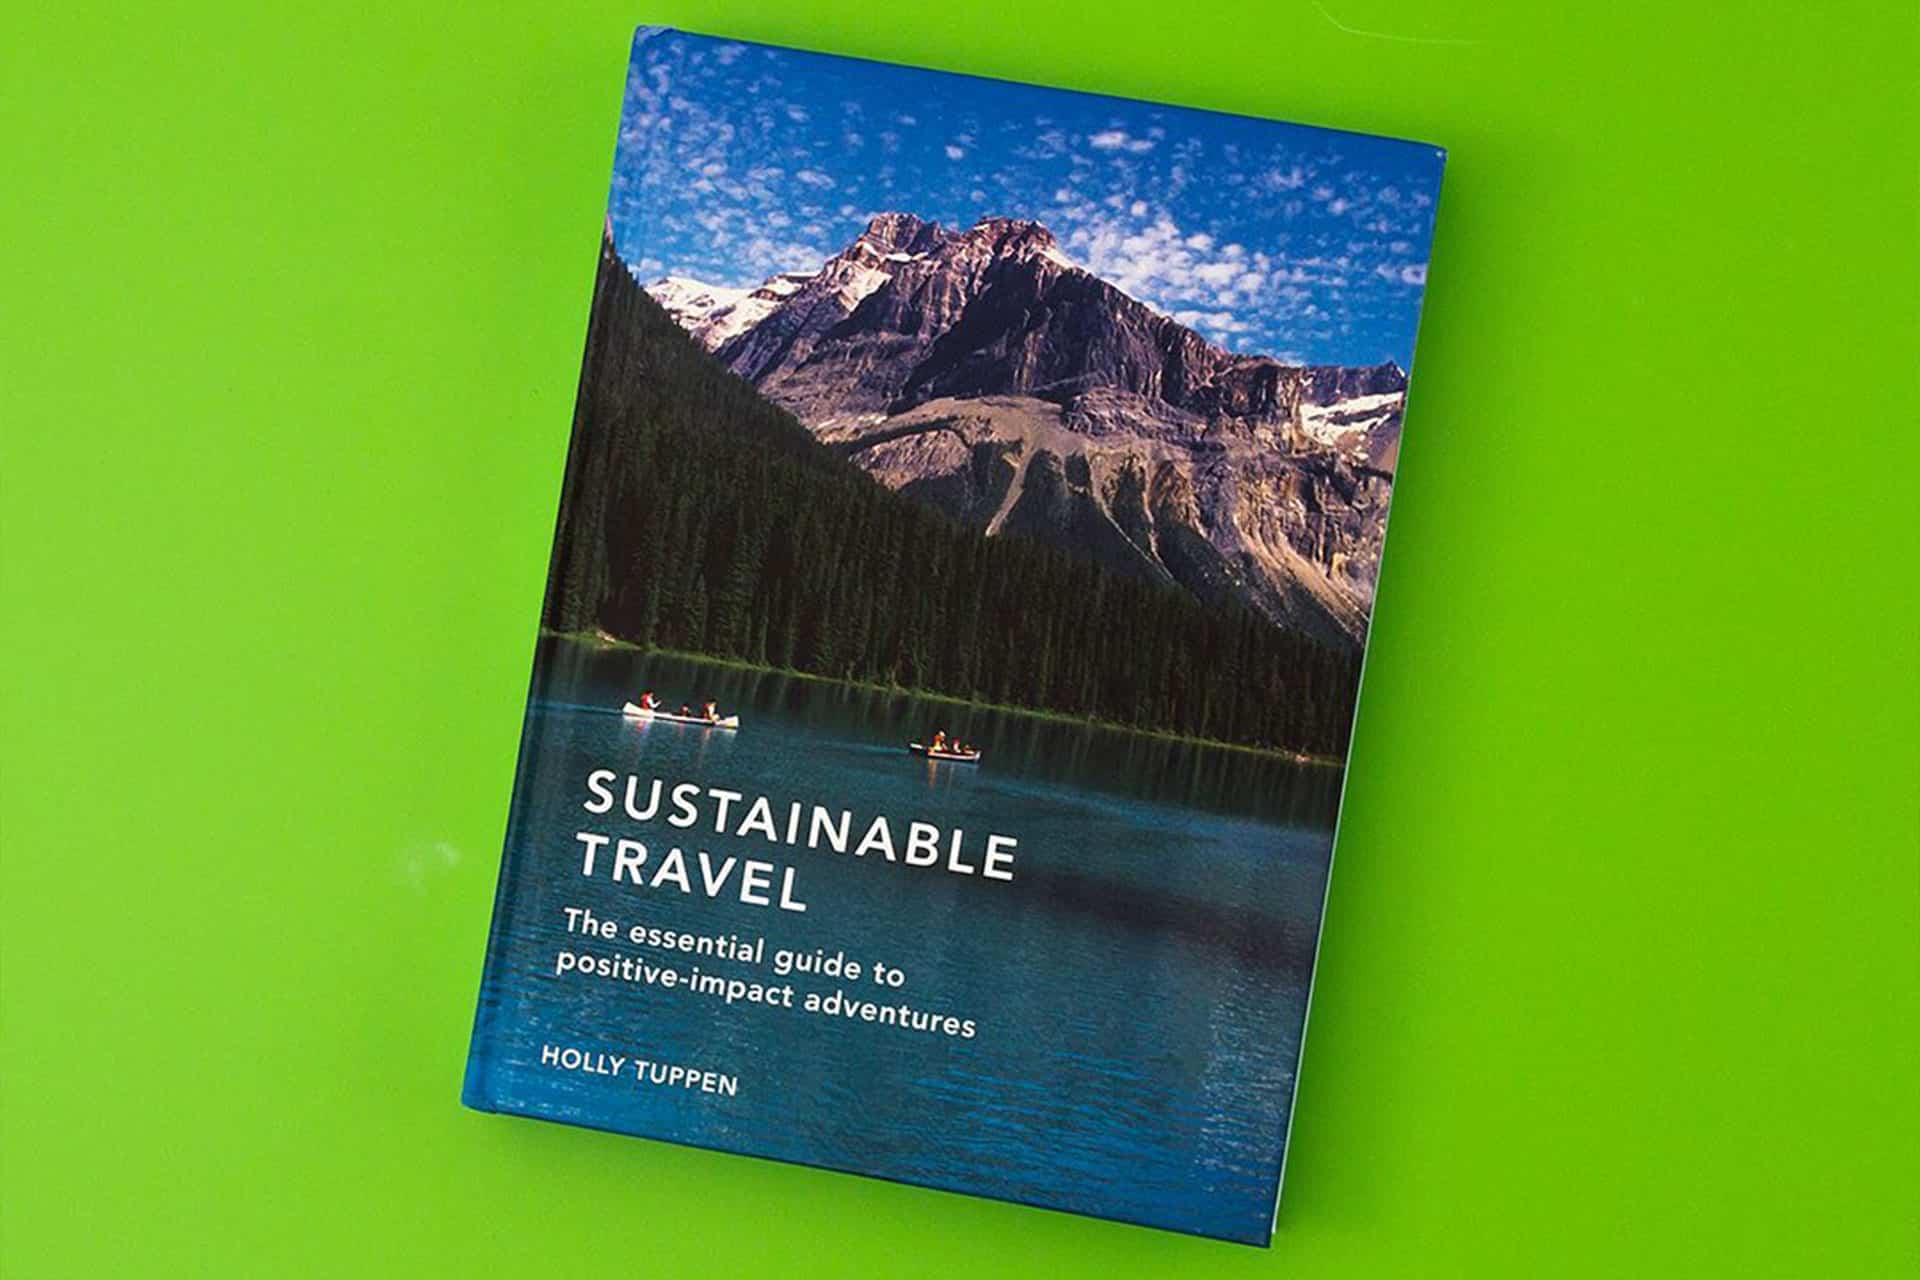 The book Sustainable Travel: The essential guide to positive-impact adventures by Holly Tuppen